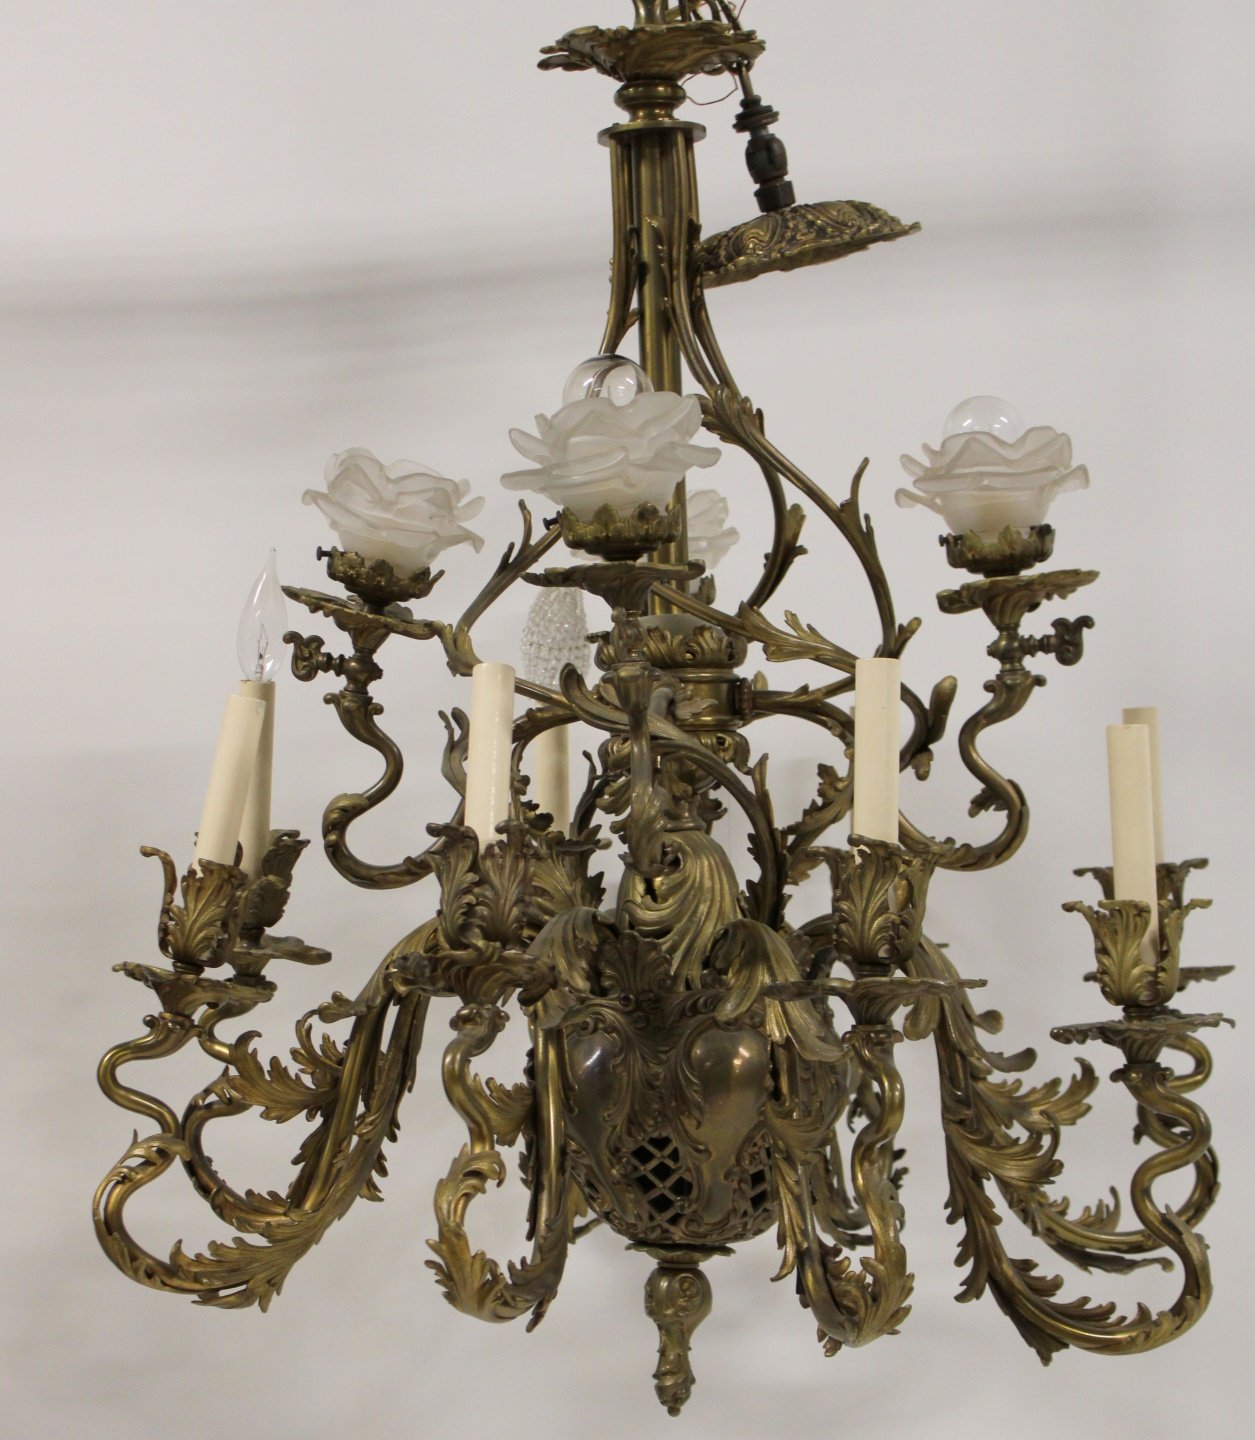 ANTIQUE 12 ARM CHANDELIER WITH